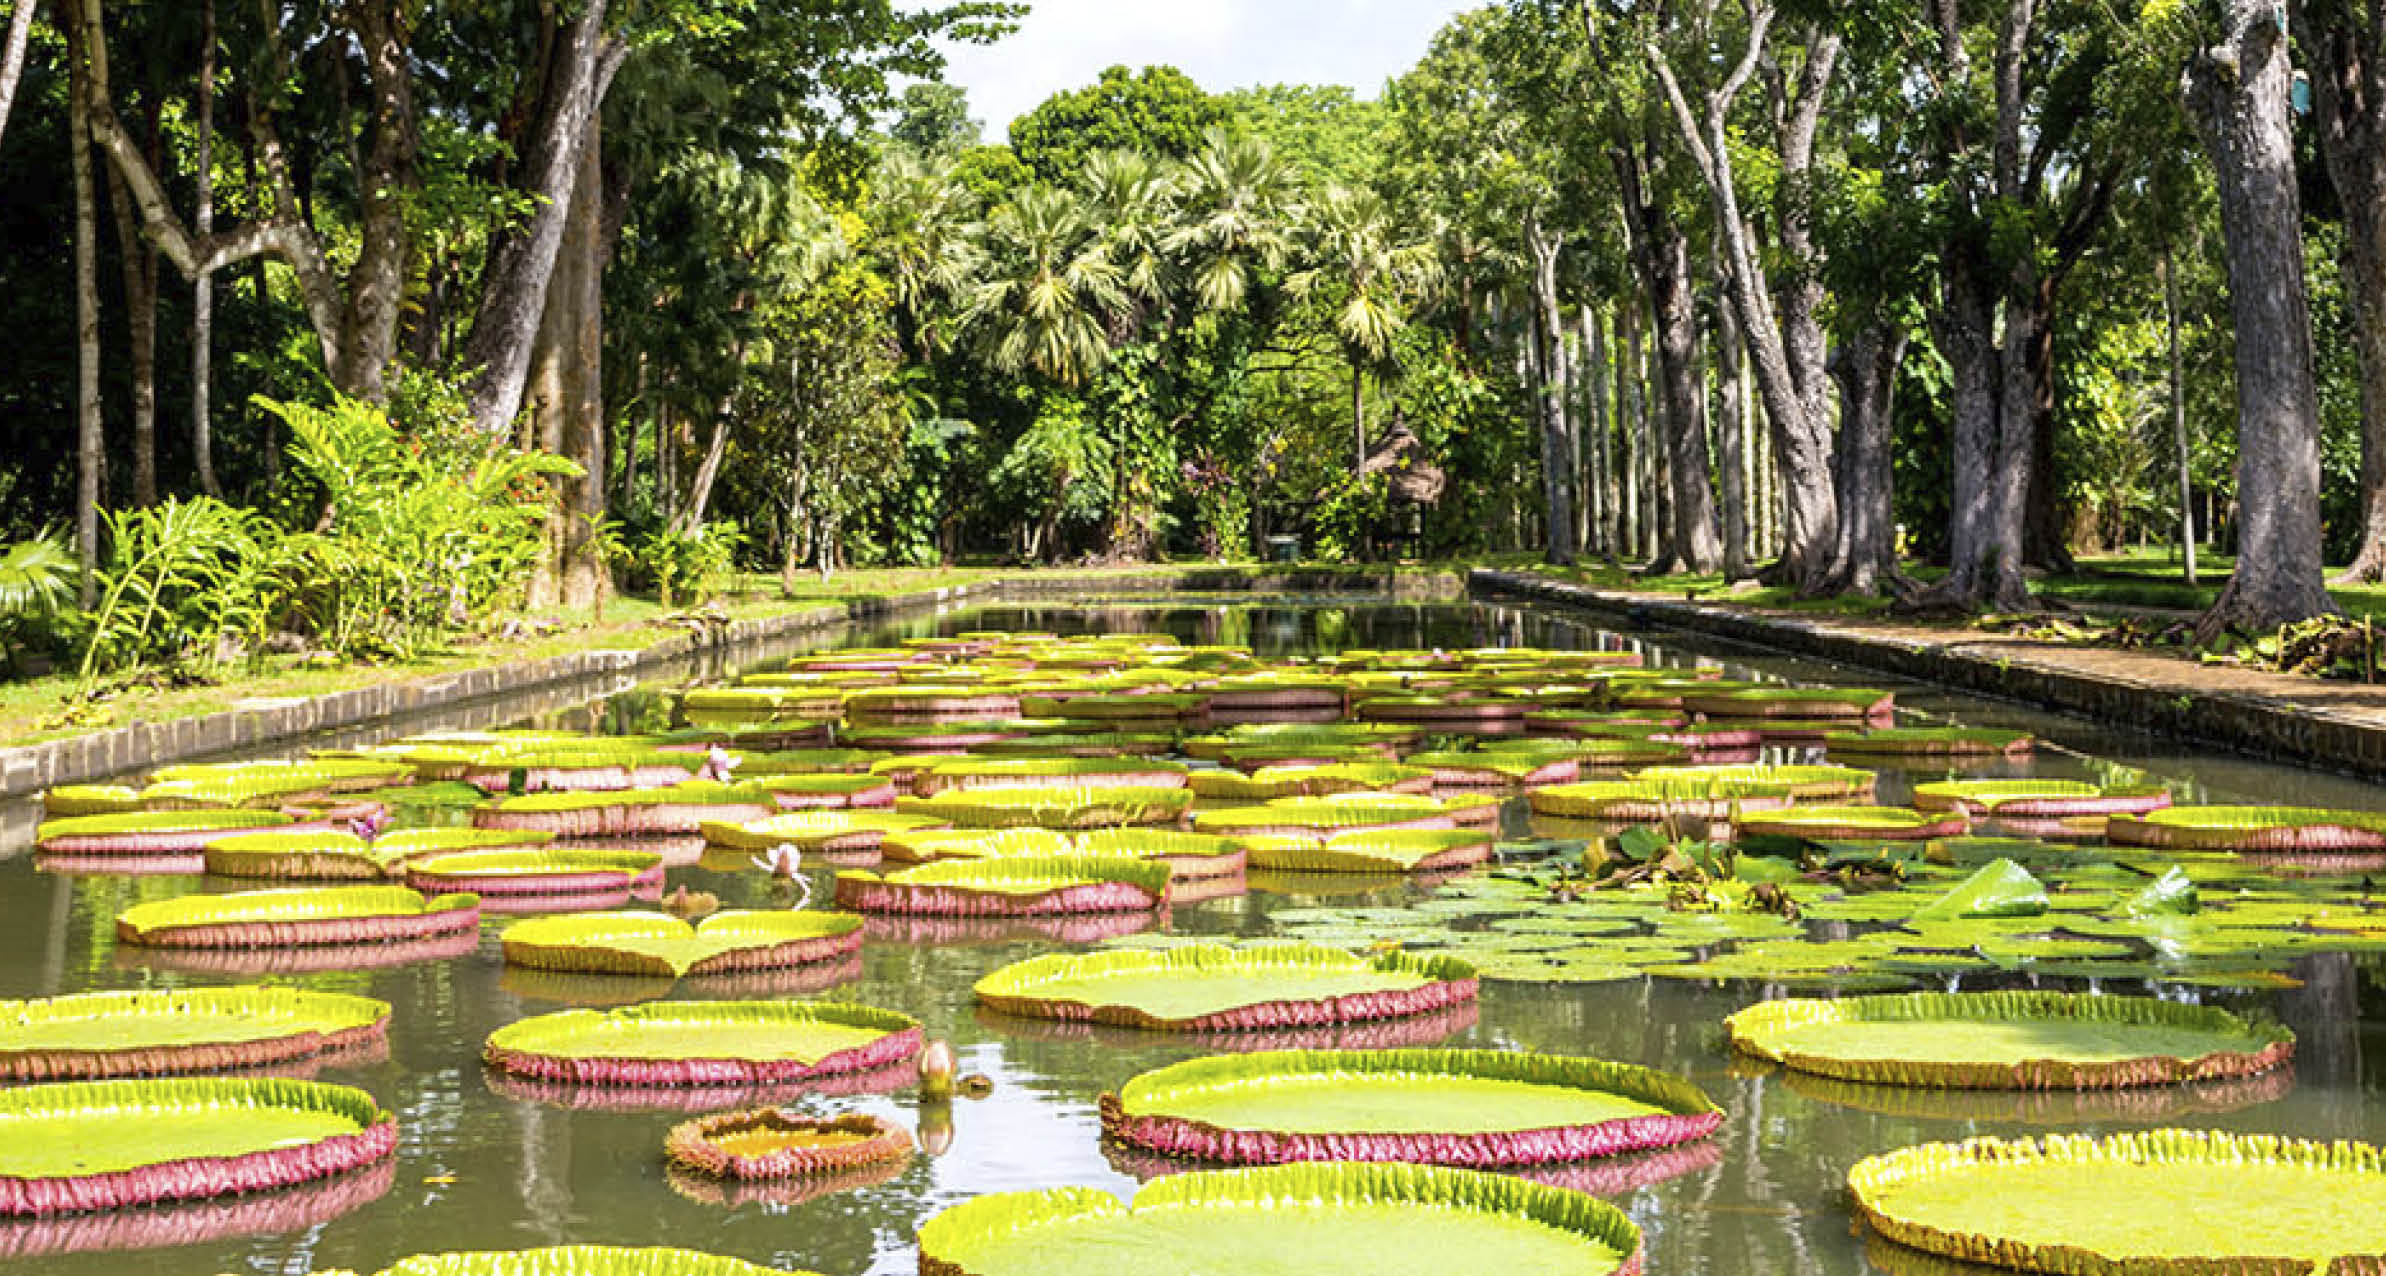 Amazon Giant Lily in Pond at Pamplemousse Gardens, Mauritius Island, Africa